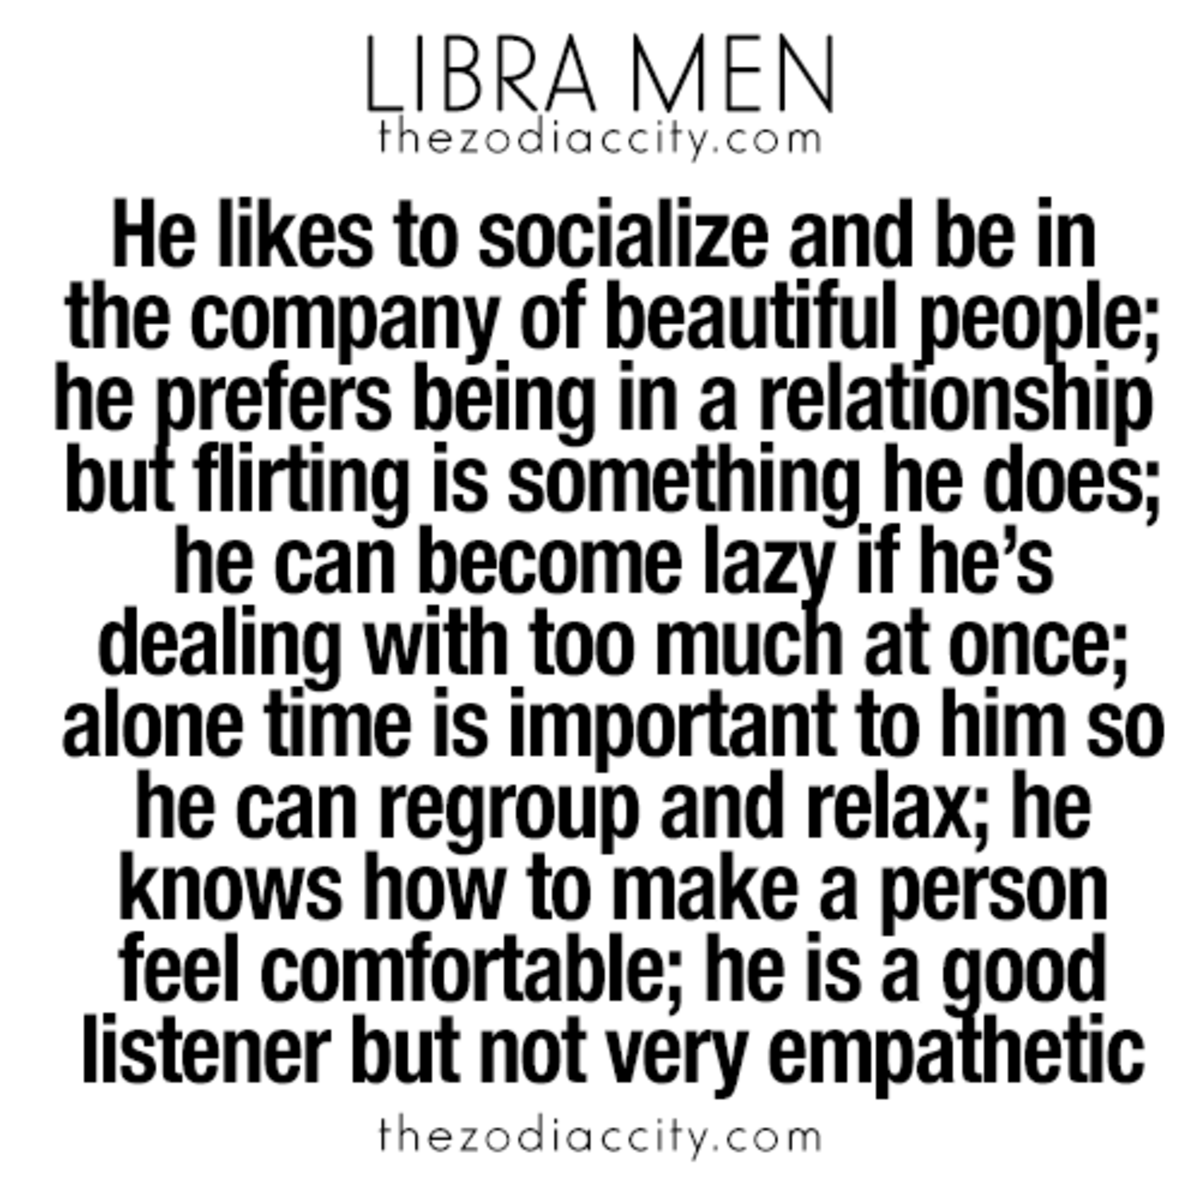 Finding and Keeping the Libra Man